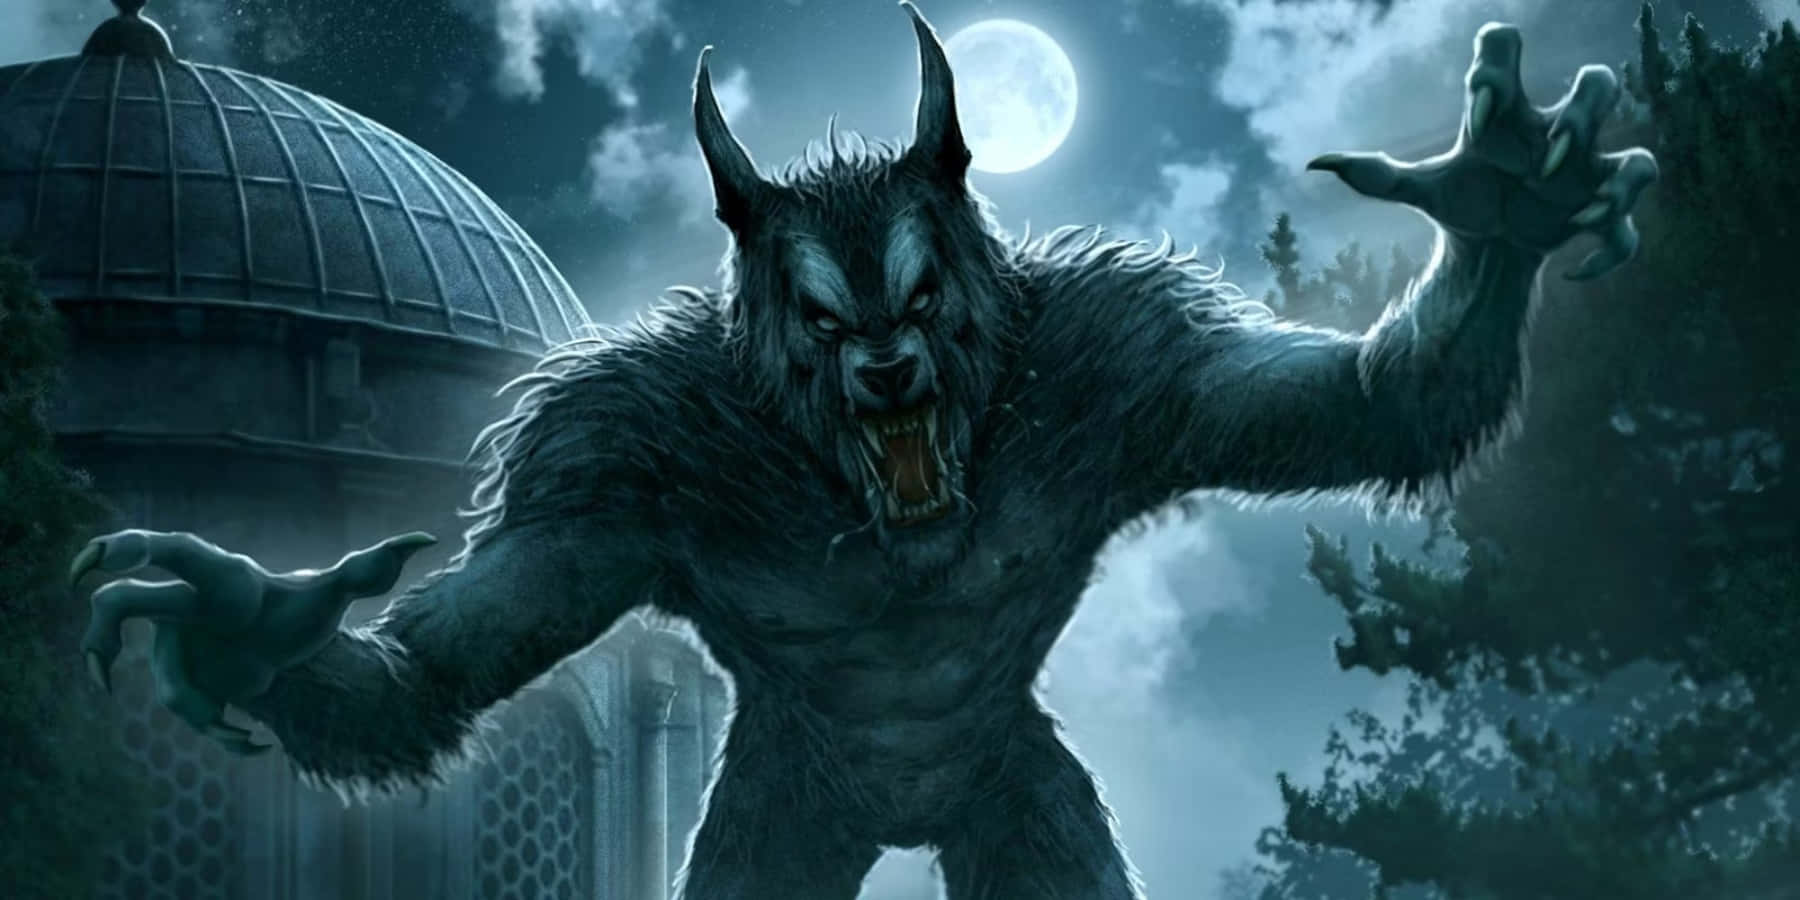 An aged werewolf howls against the night sky